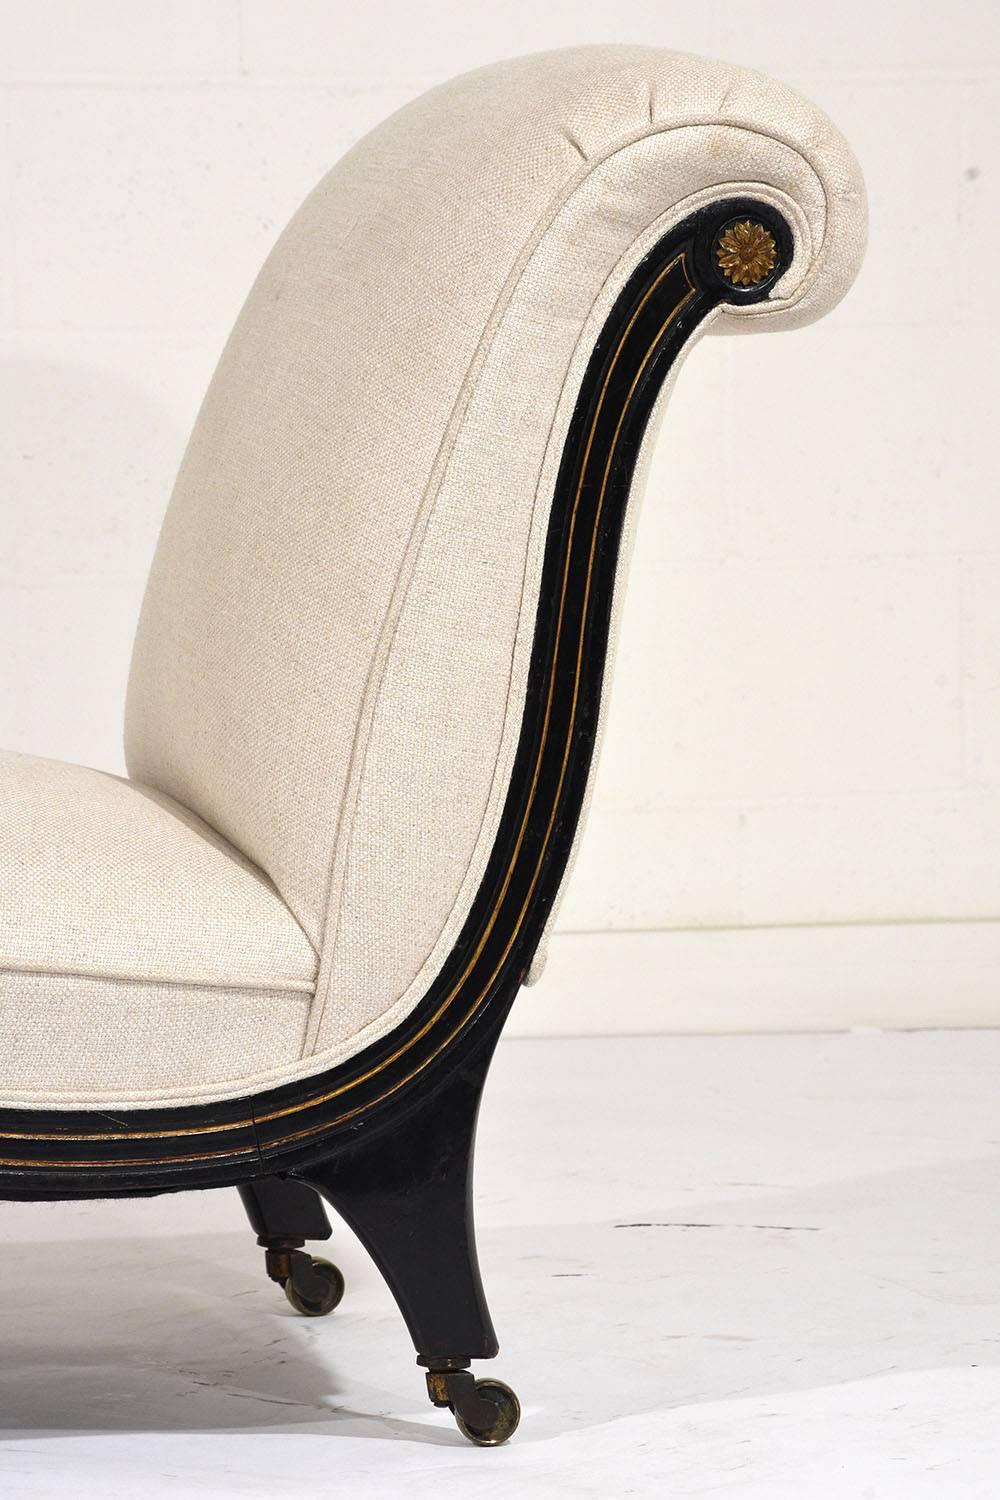 Fabric Pair of French Regency-Style Ebonized Slipper Chairs